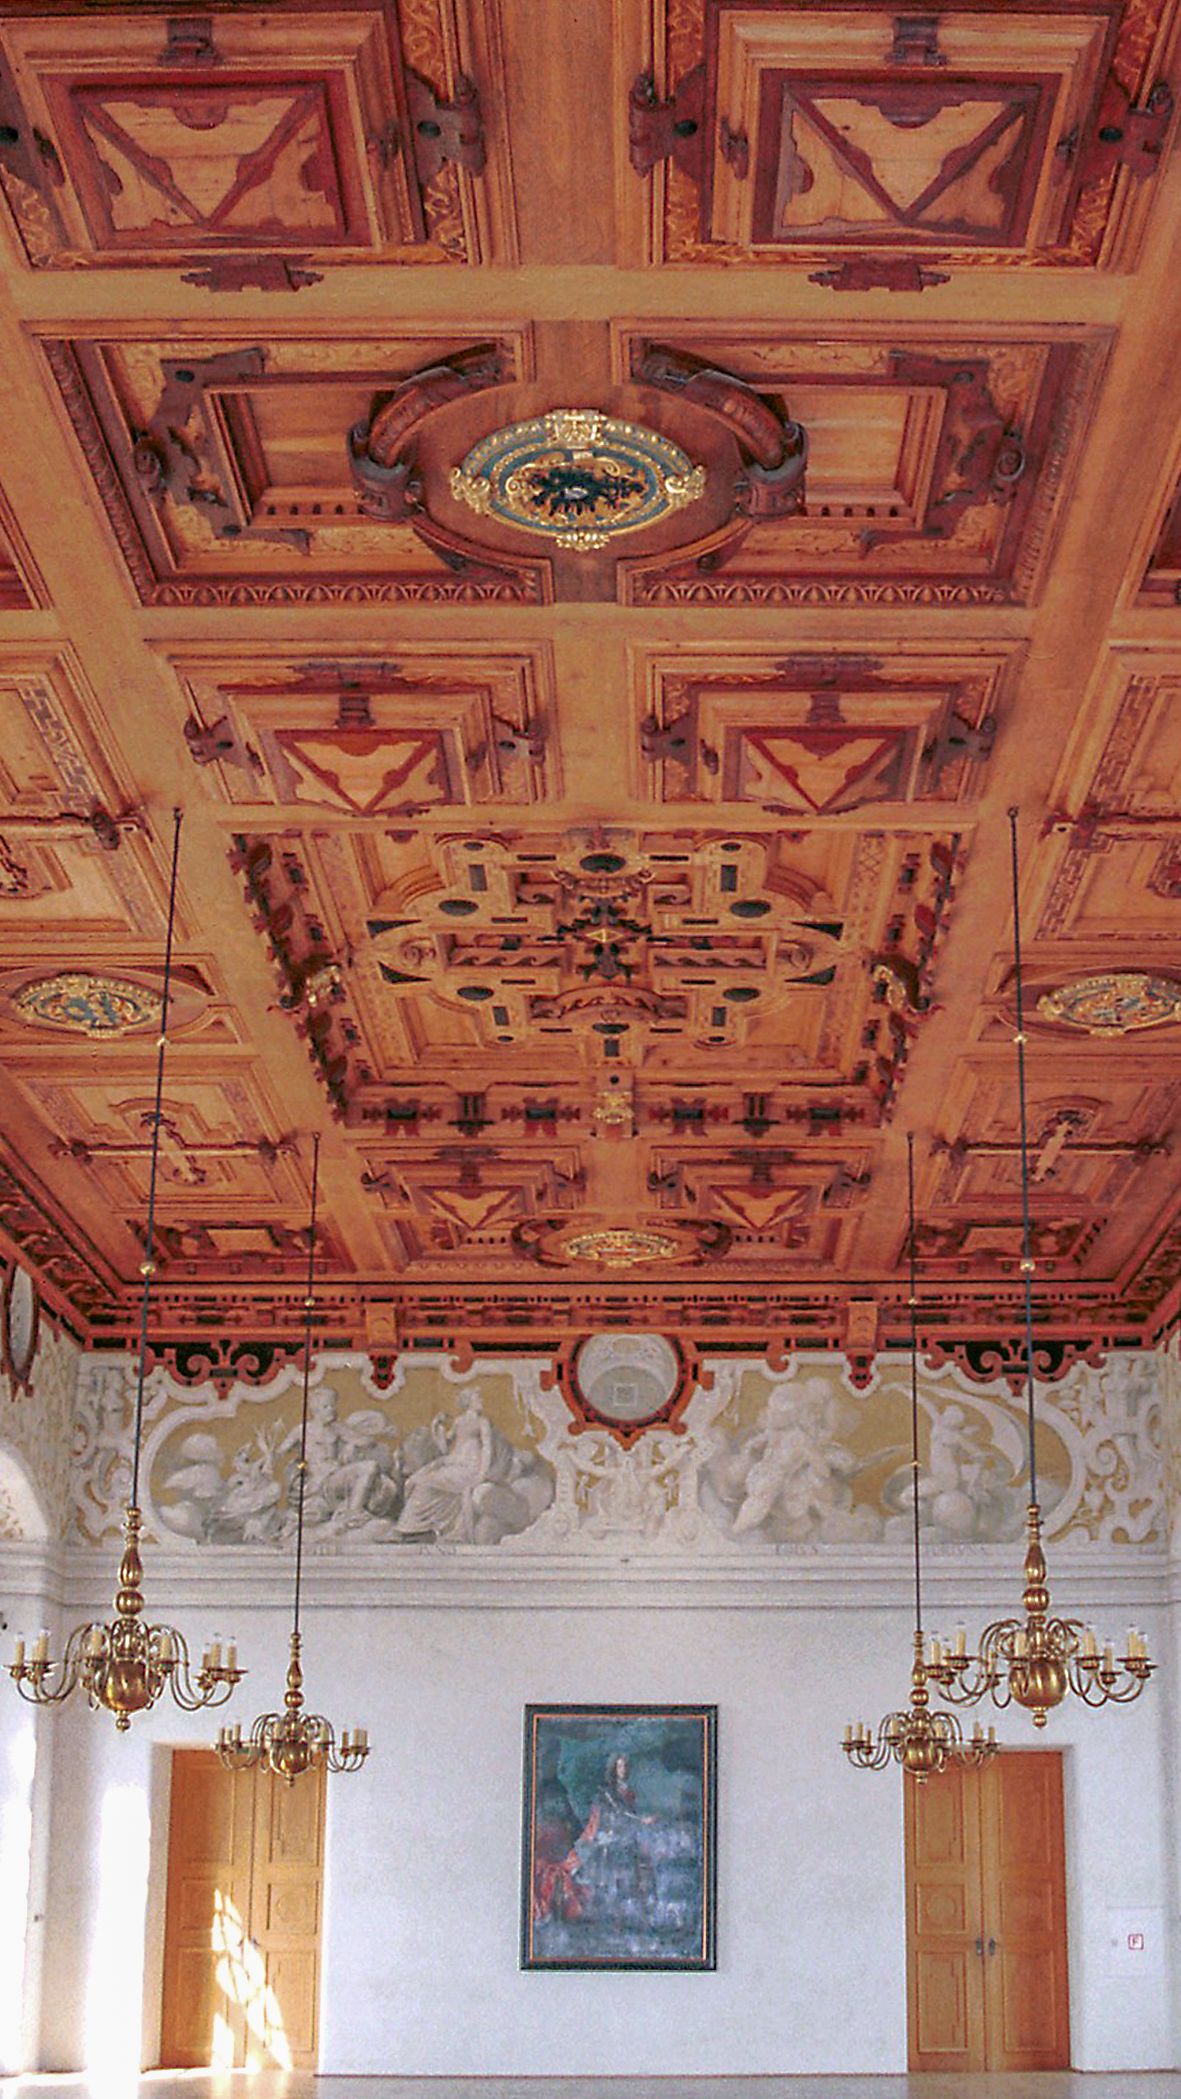 Renaissance wooden coffered ceiling in the hall of the Dachau Palace